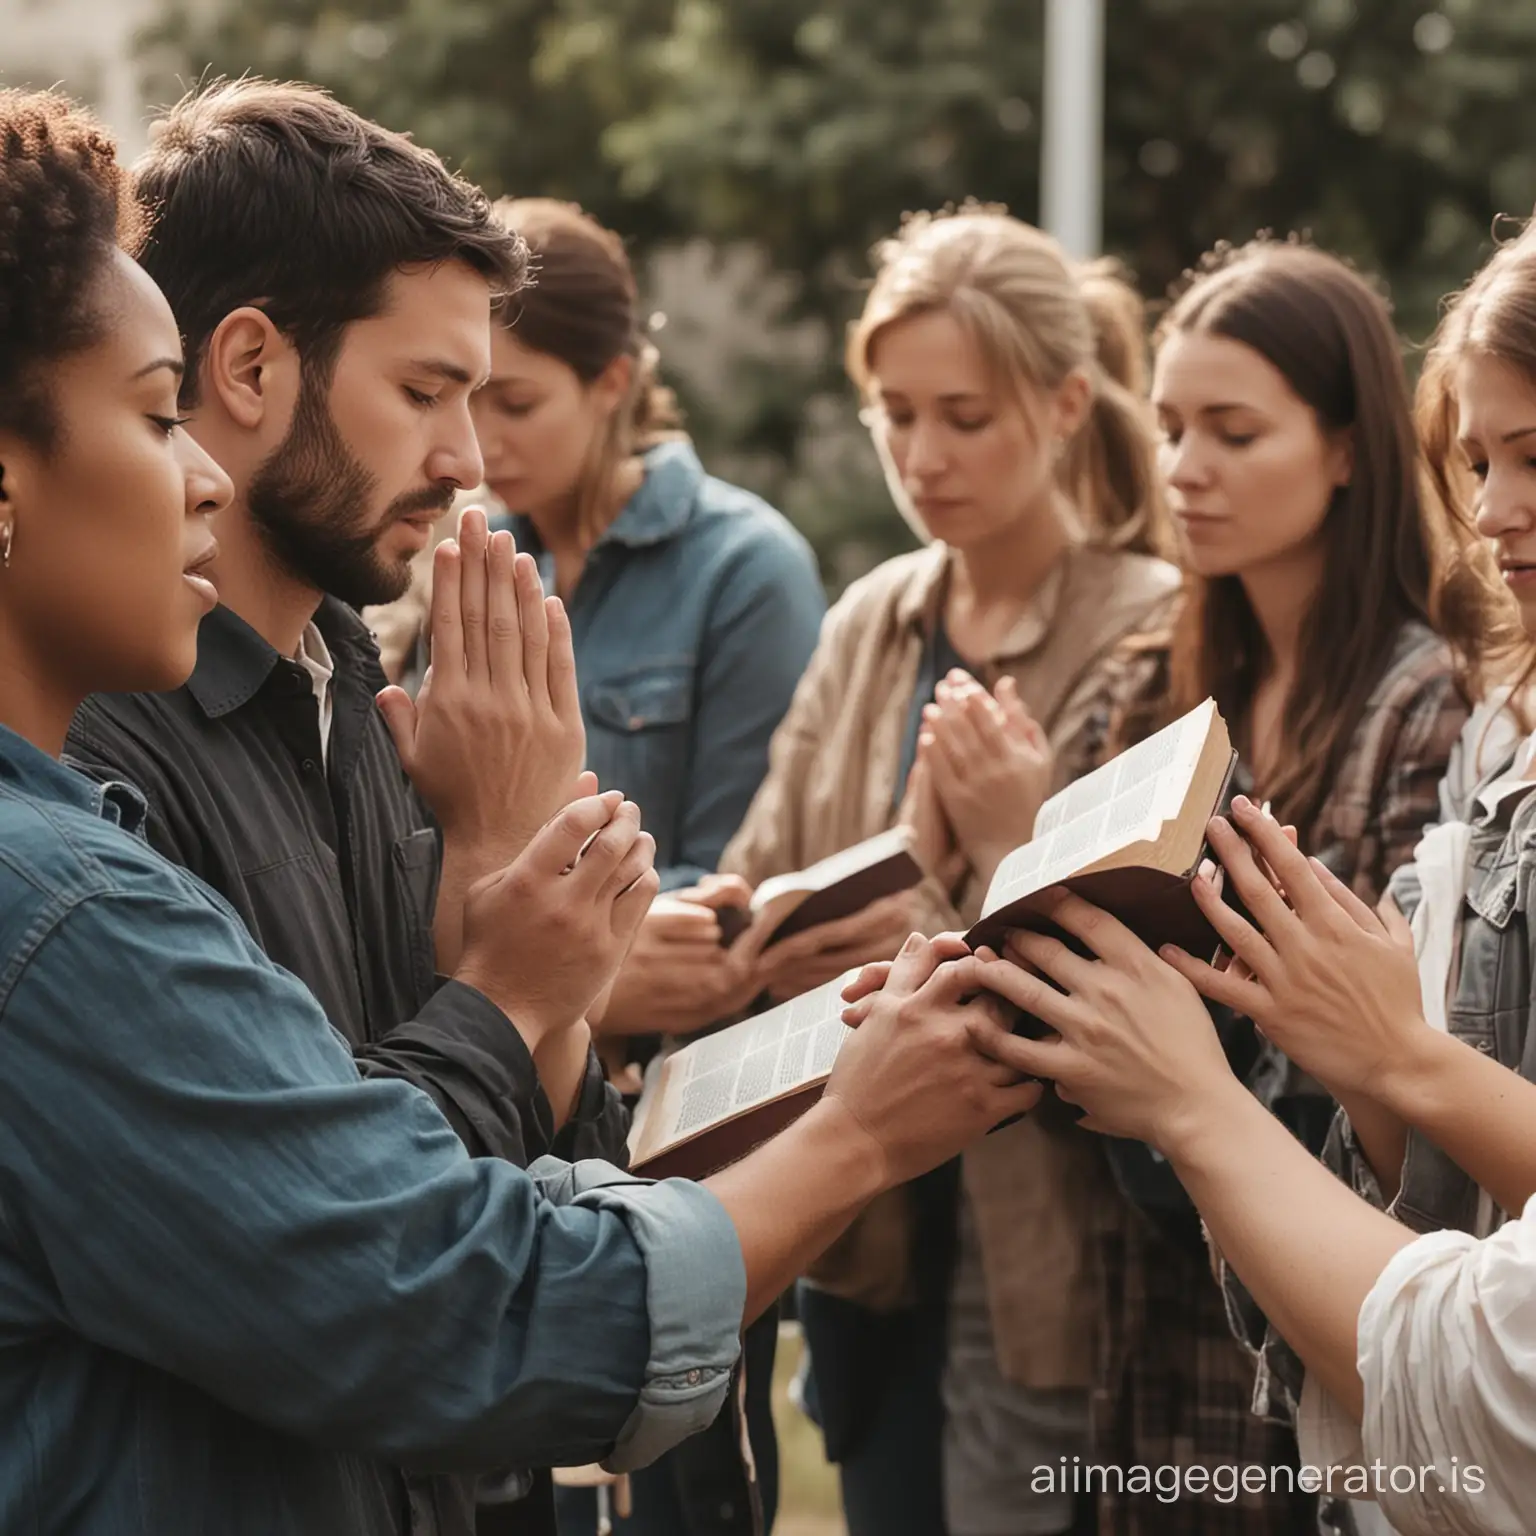 A Christian group of people with bibles praying passionately for other people present